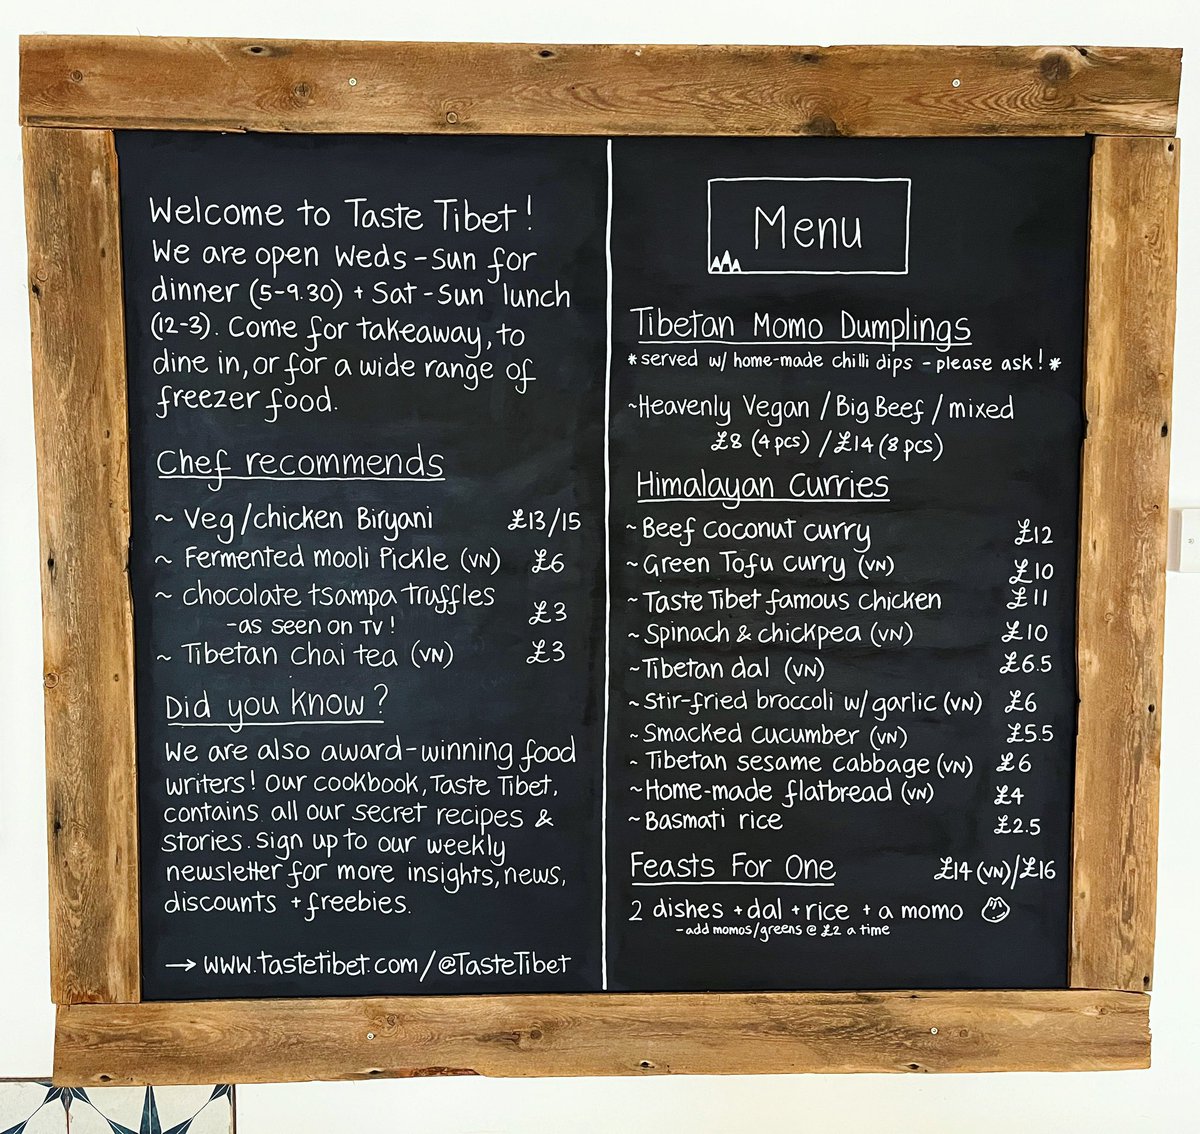 Our last week open for a while…. Let’s make it a good one! Open tonight from 5pm with this menu, which runs through until Sunday evening. Dine in, take away or home delivery through Deliveroo. And don’t forget to stock up on freezer food for the break! SEE YOU SOON!!